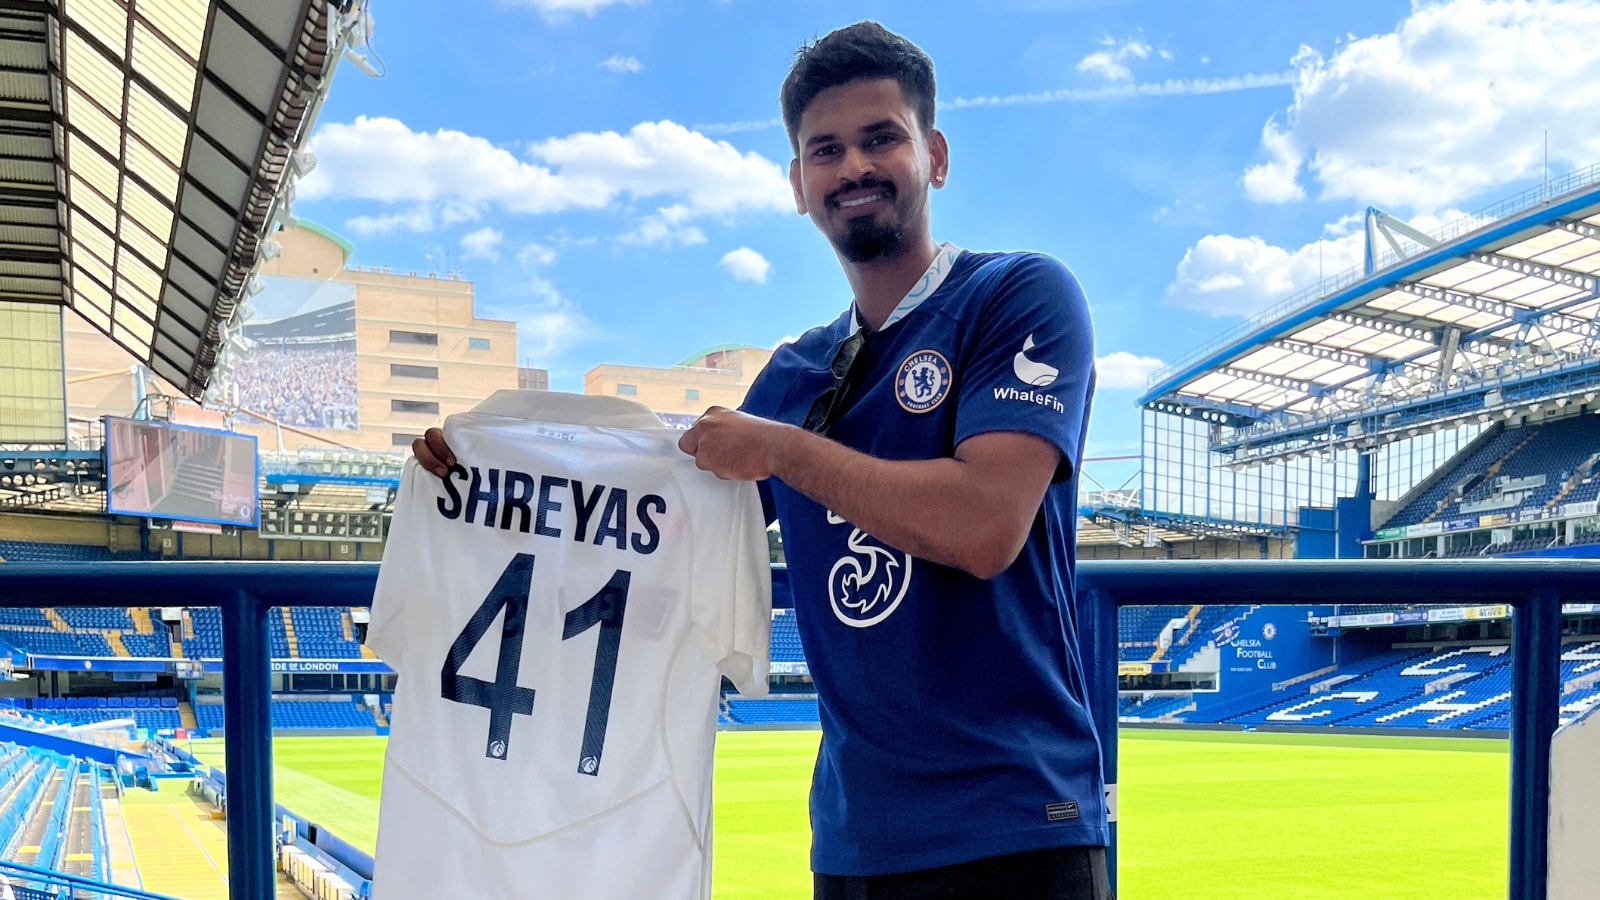 Chelsea left-back Ben Chilwell gifts a jersey to Shreyas Iyer. 📸: Chelsea  . . #ShreyasIyer #Chelsea #Cricket #Football #CricTracker